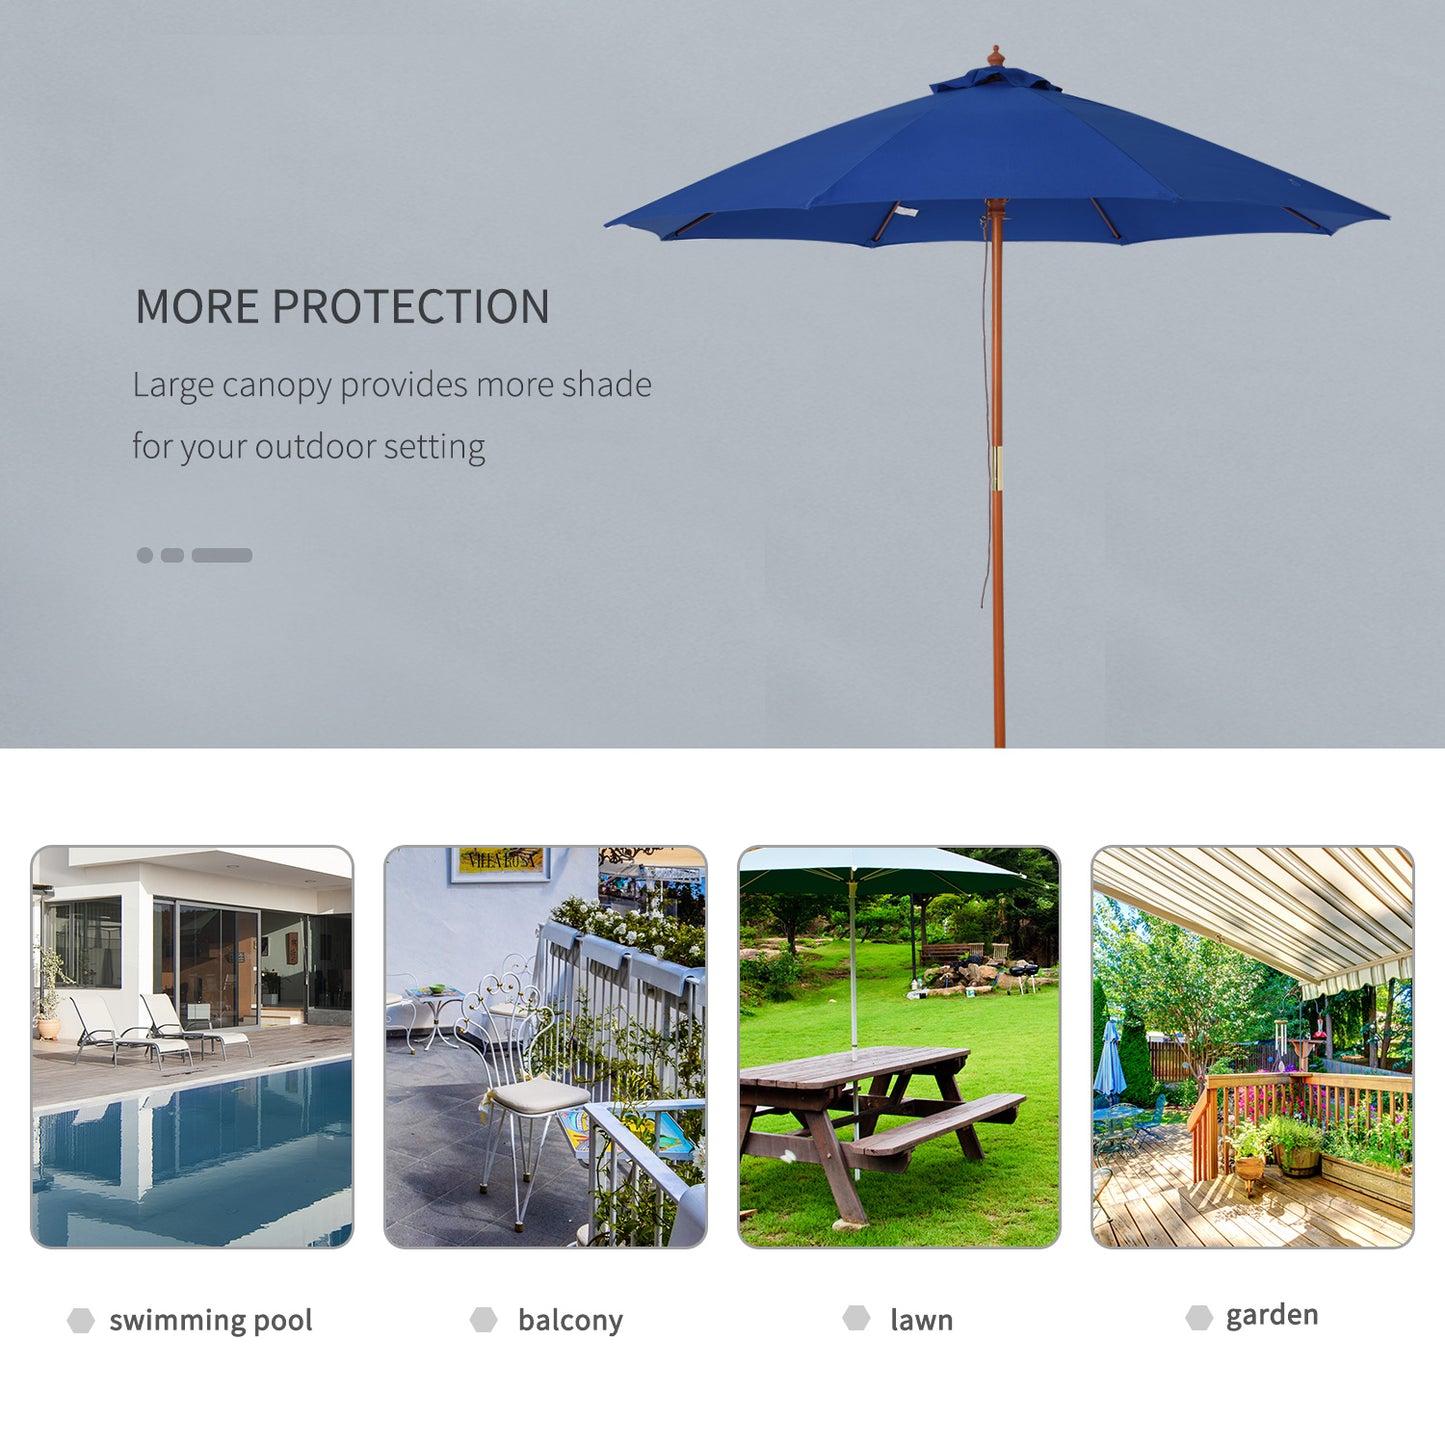 Outsunny 2.5m Wood Garden Parasol Sun Shade Patio Outdoor Market Umbrella Canopy with Top Vent, Blue w/ Vent